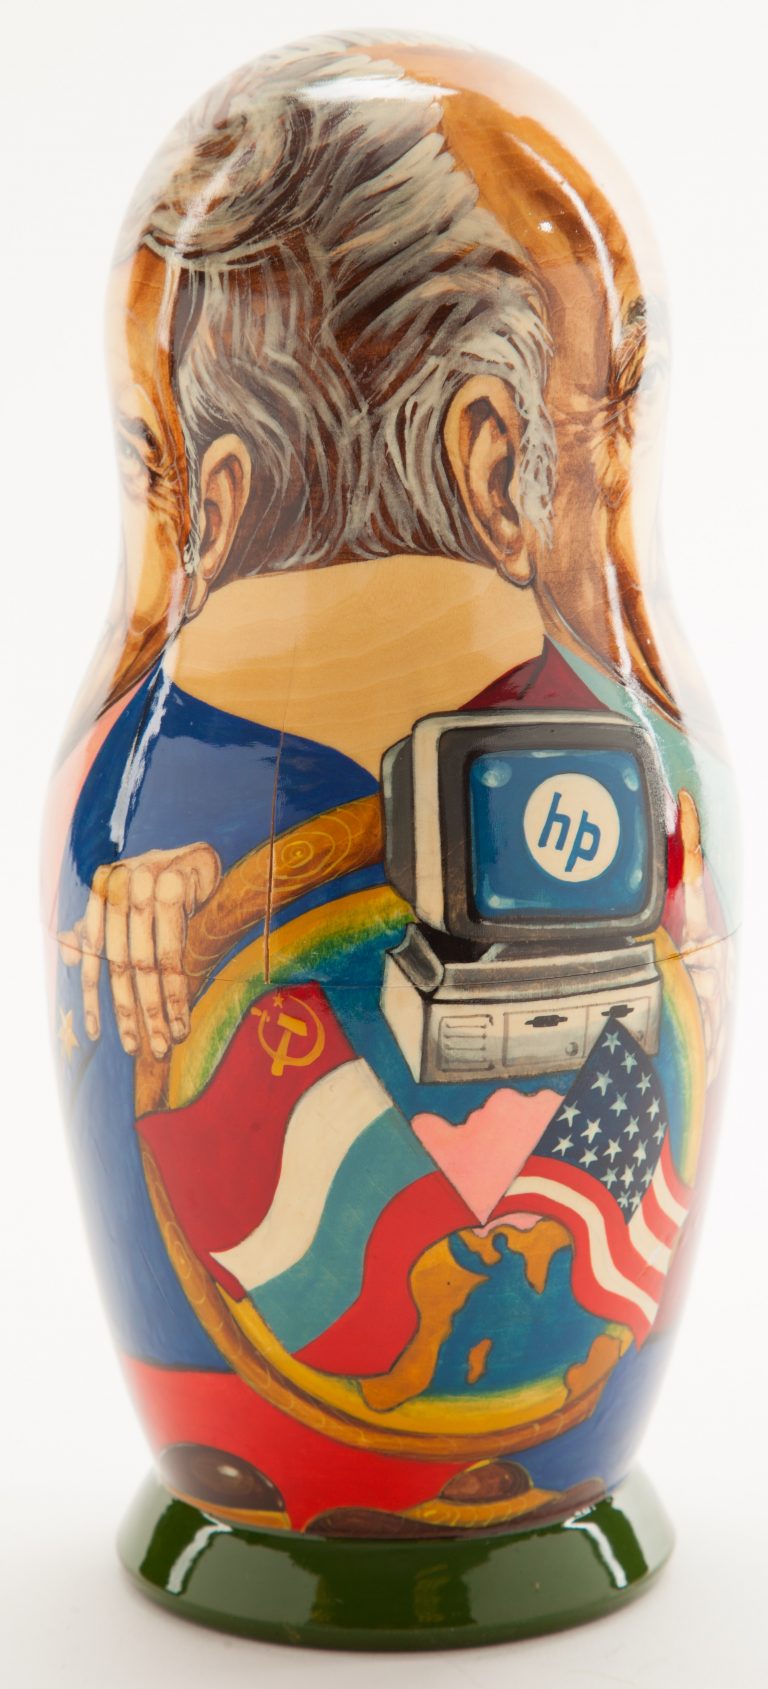 Side of the Bill/Dave matryoshka doll featuring an HP computer and the Russian and US flags.